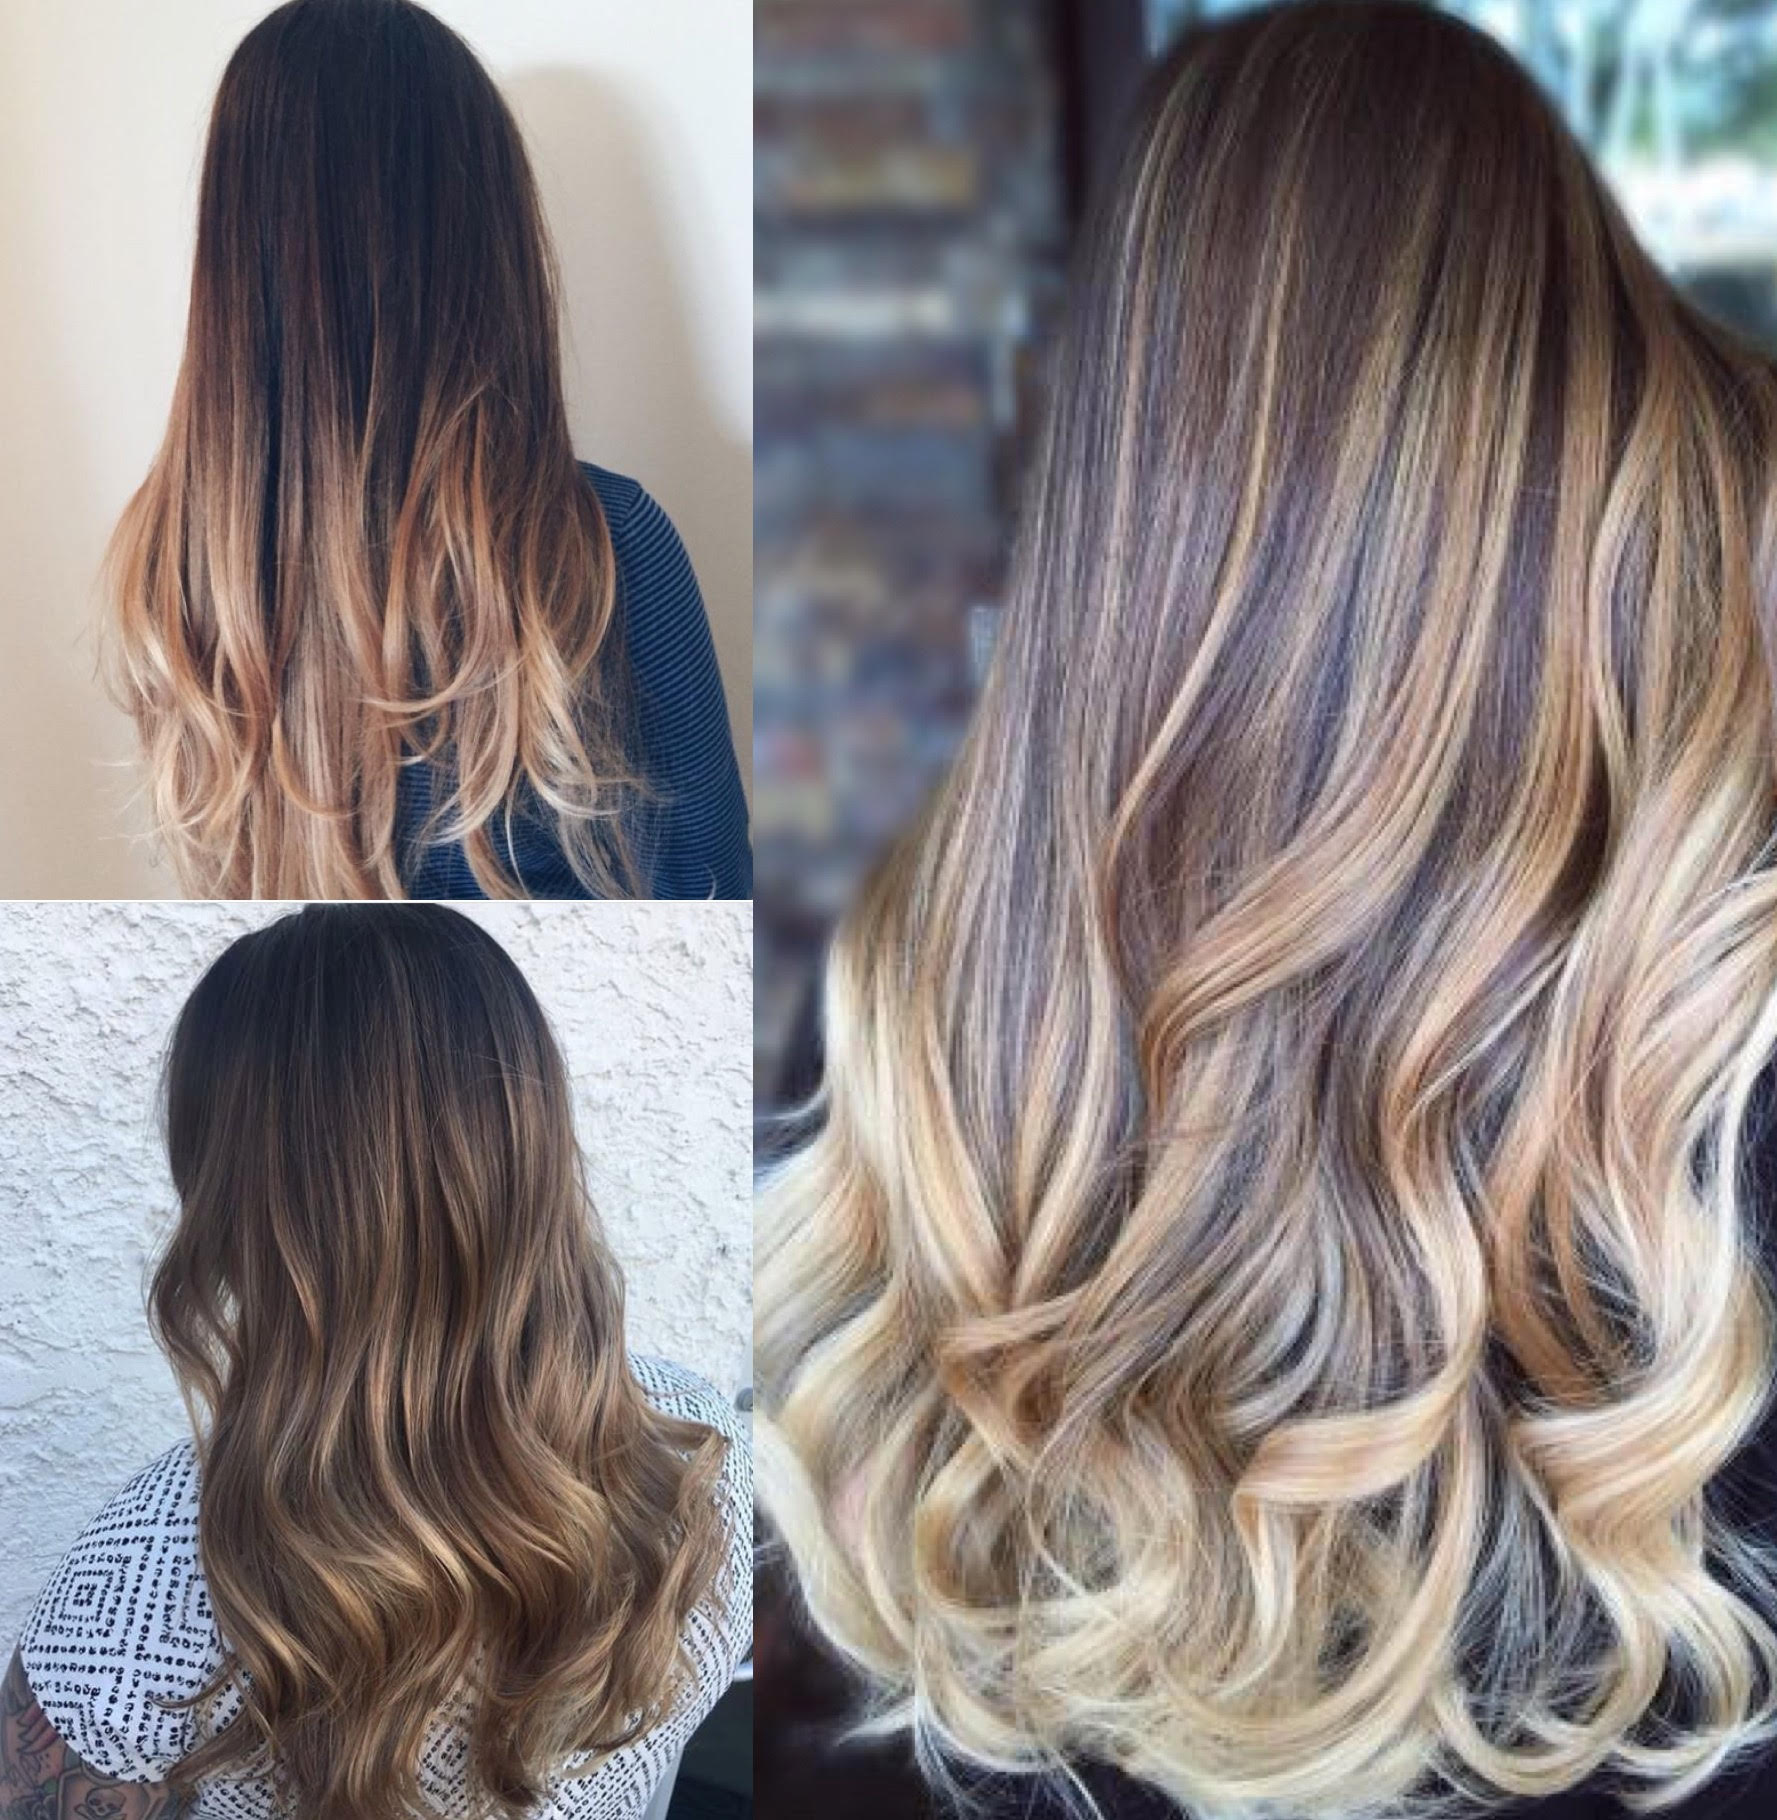 Balayage vs Foils vs All Over Color: What's the Difference?